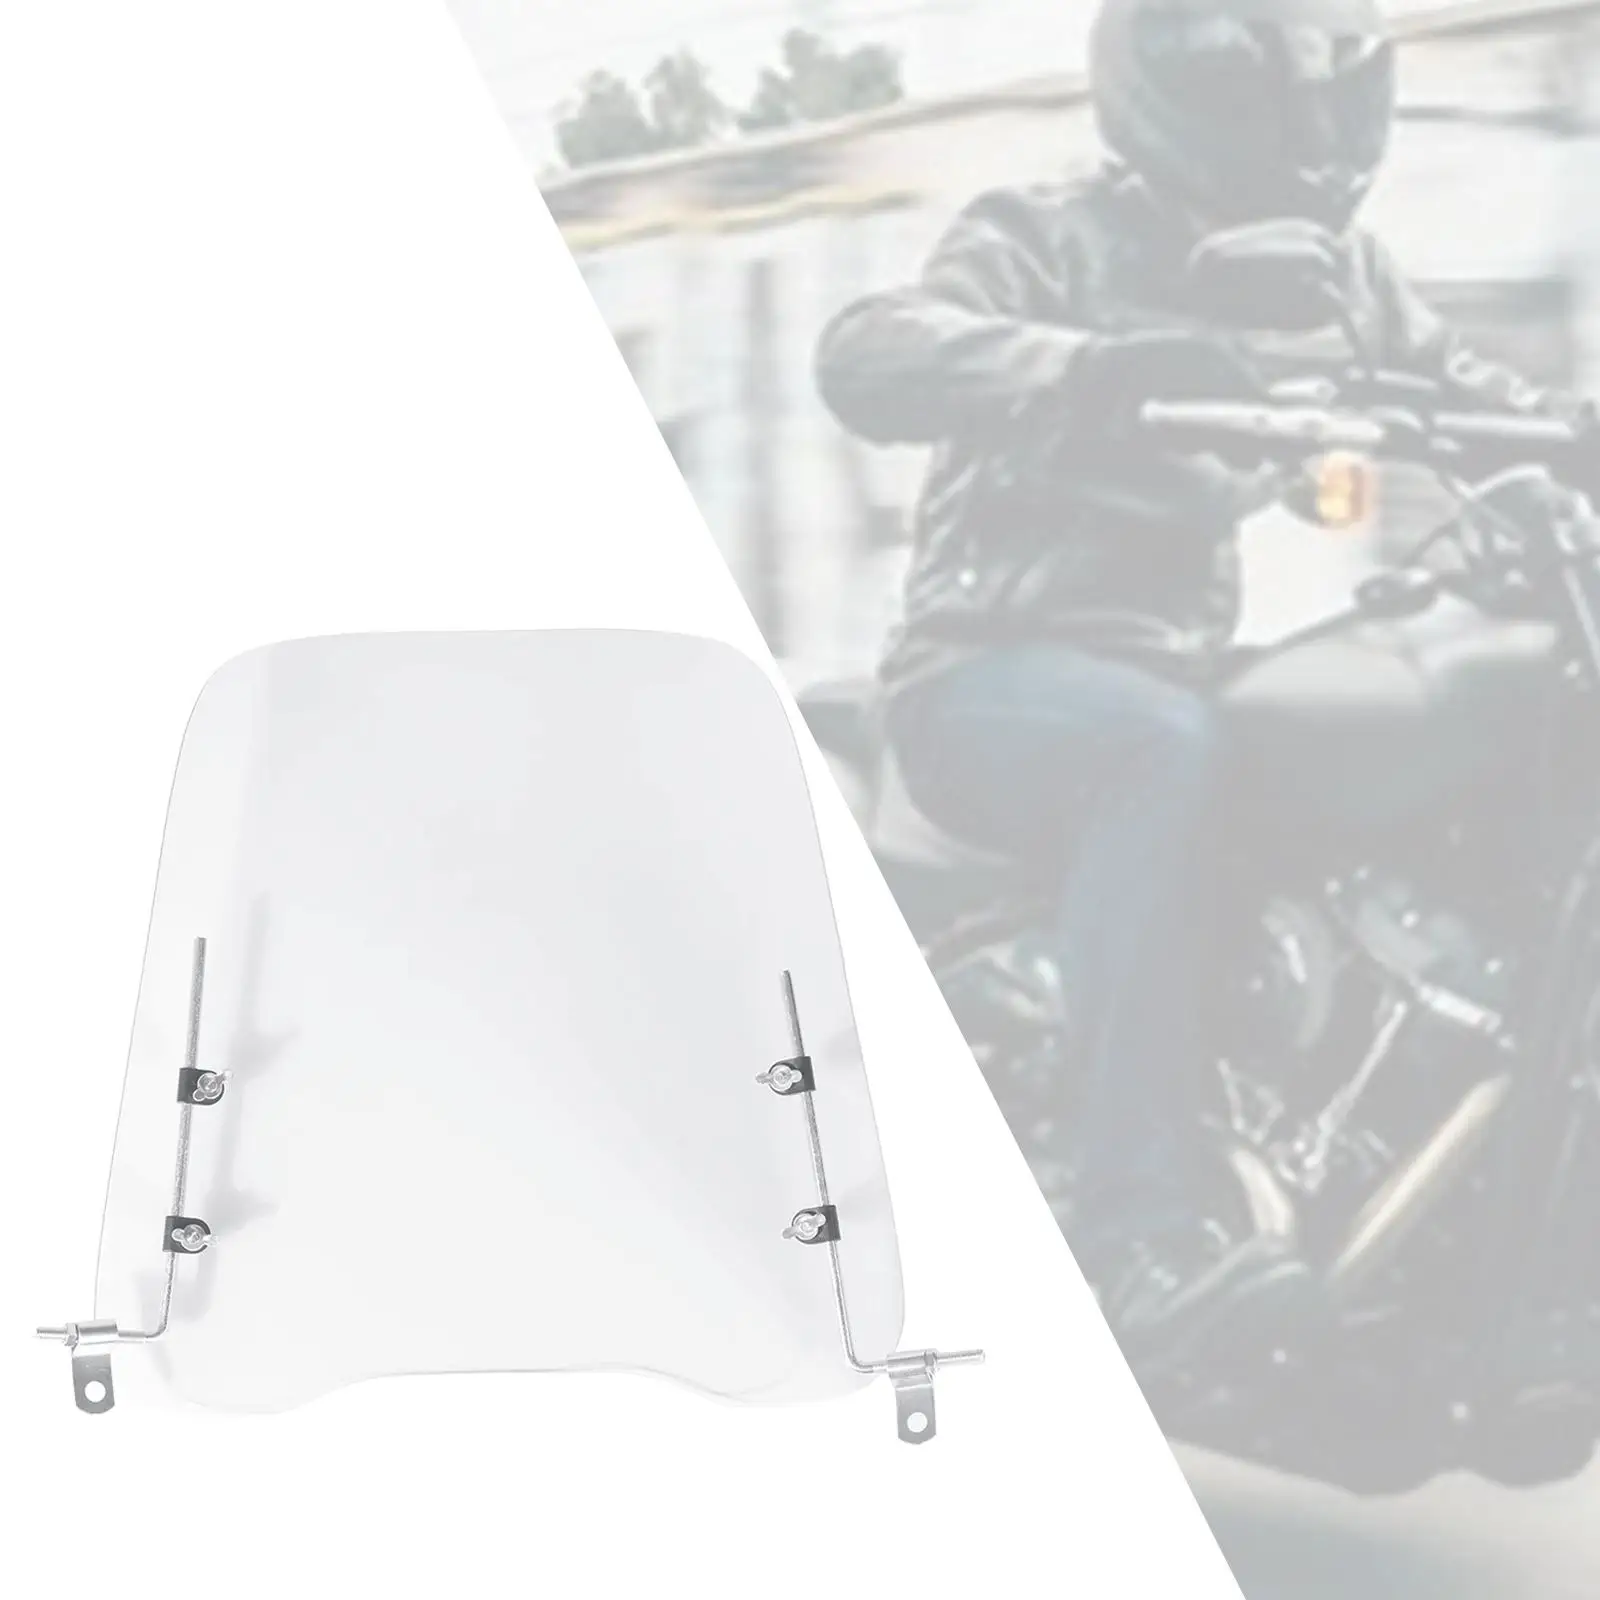 Universal Motorcycle Windscreen Widened Edging Scooters Windshield Extension Spoiler Windshield for Kawasaki Electric Car